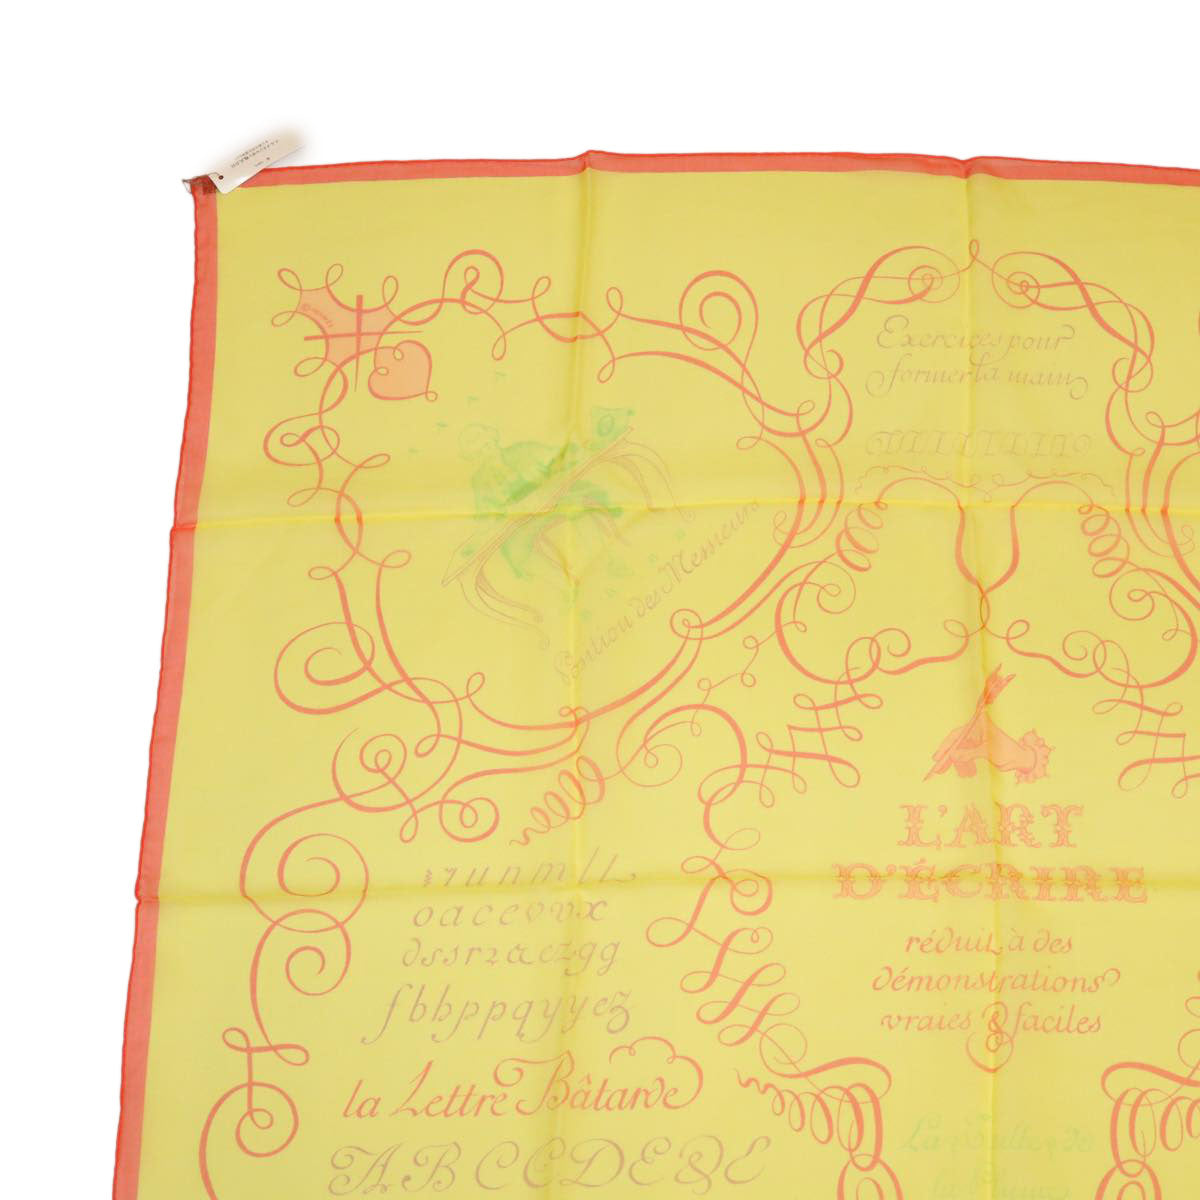 HERMES Carre 90 L'ARY D'ECRIRE Scarf Silk Orange Yellow Auth 32448 - 0